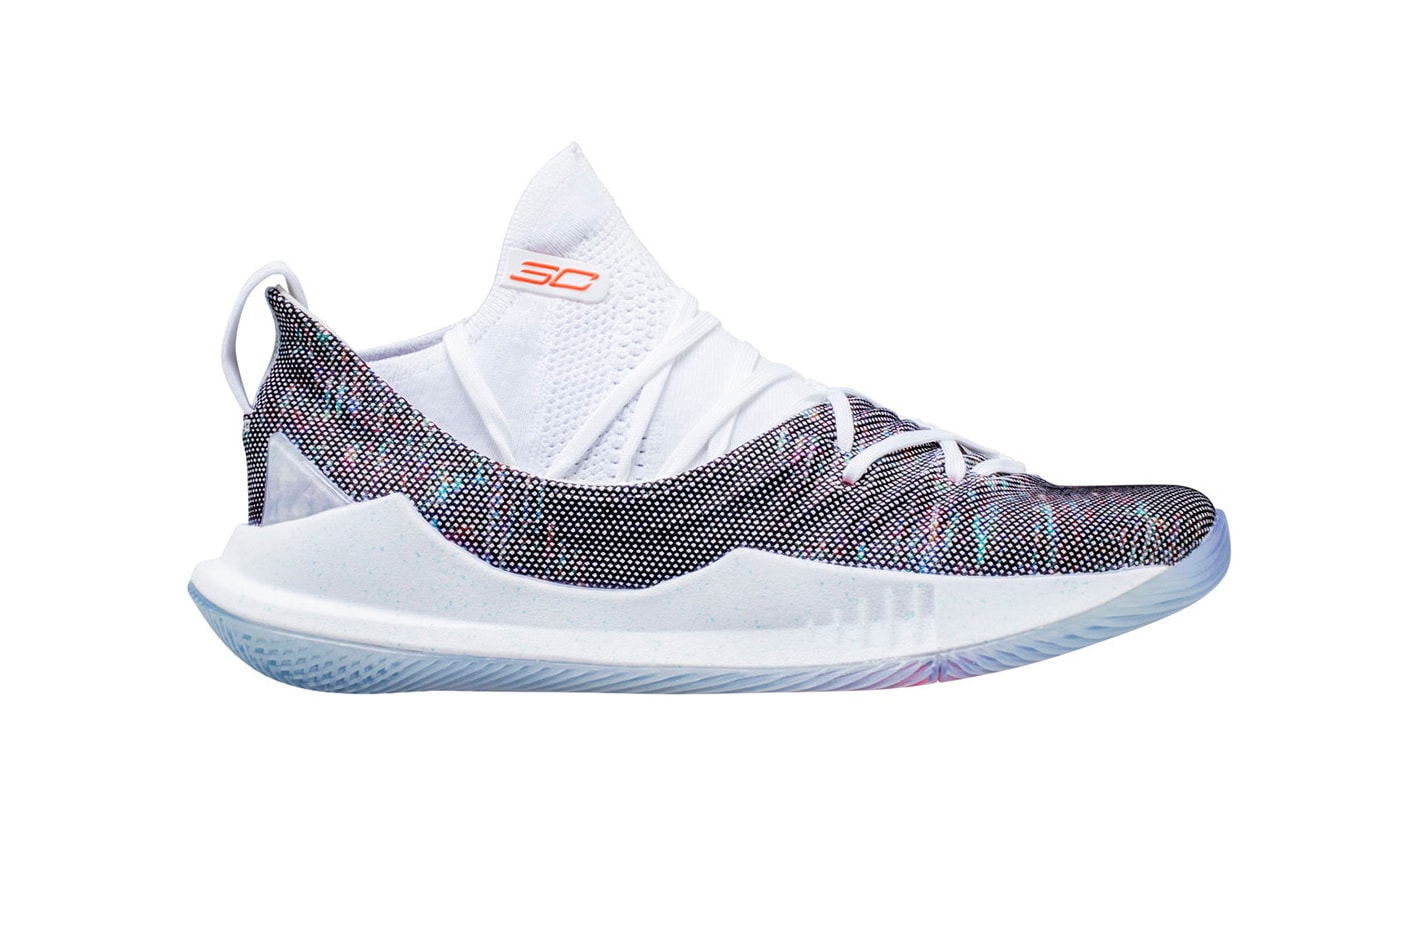 Under Armour Curry 5「Welcome Home」配色亮相